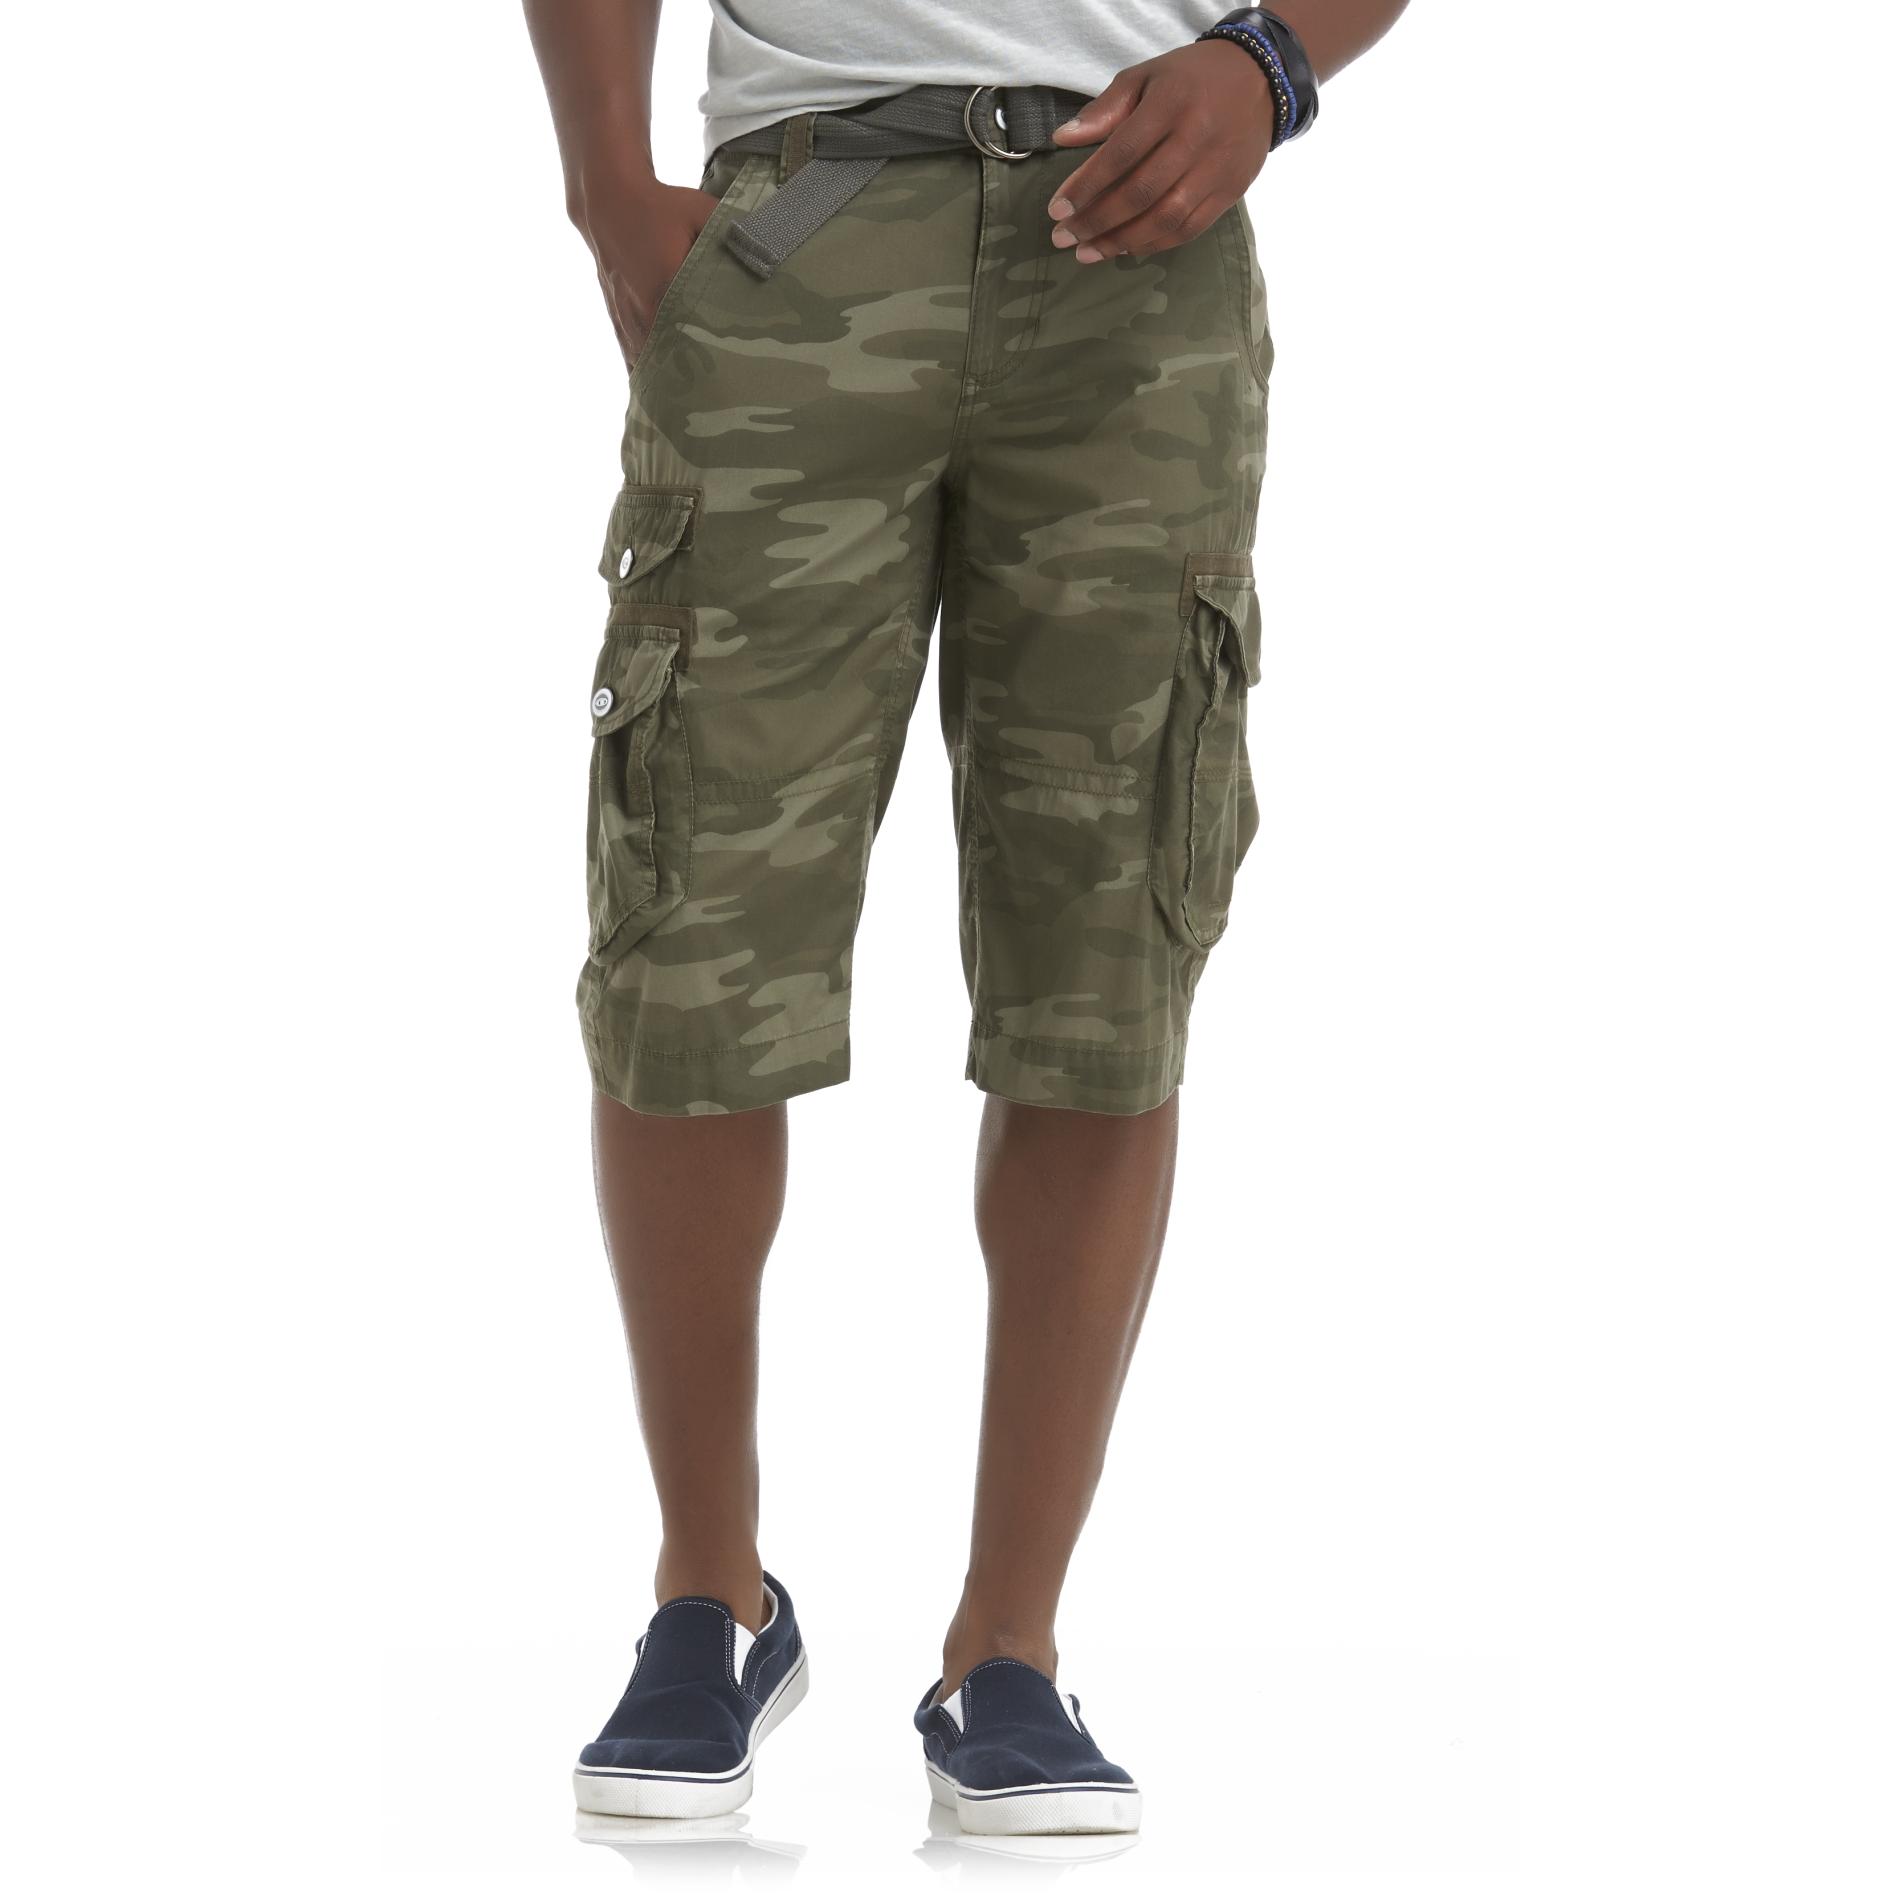 Young Men's Cargo Shorts & Belt - Camouflage